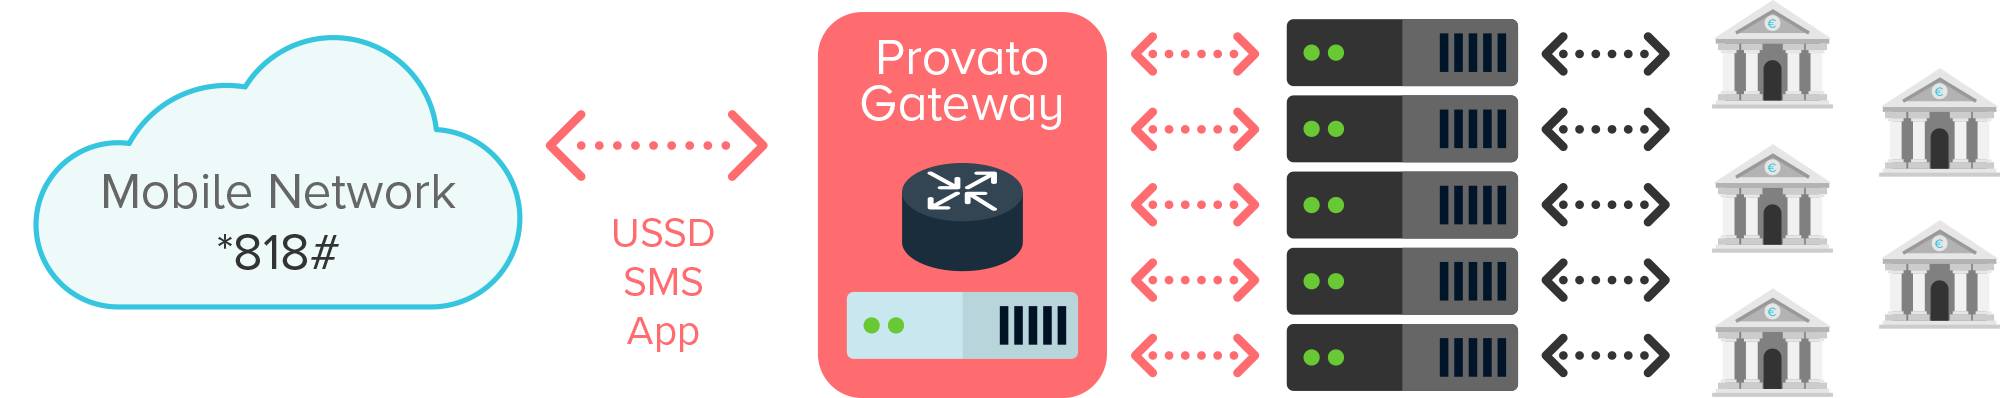 Overview diagram of how the Provato Gateway is deployed as part of the M-Birr mobile money service. Diagram shows a message network at the right-hand-side, feeding messages via different protocols to the Provato service, which in turn routes them to destination service providers and banks.